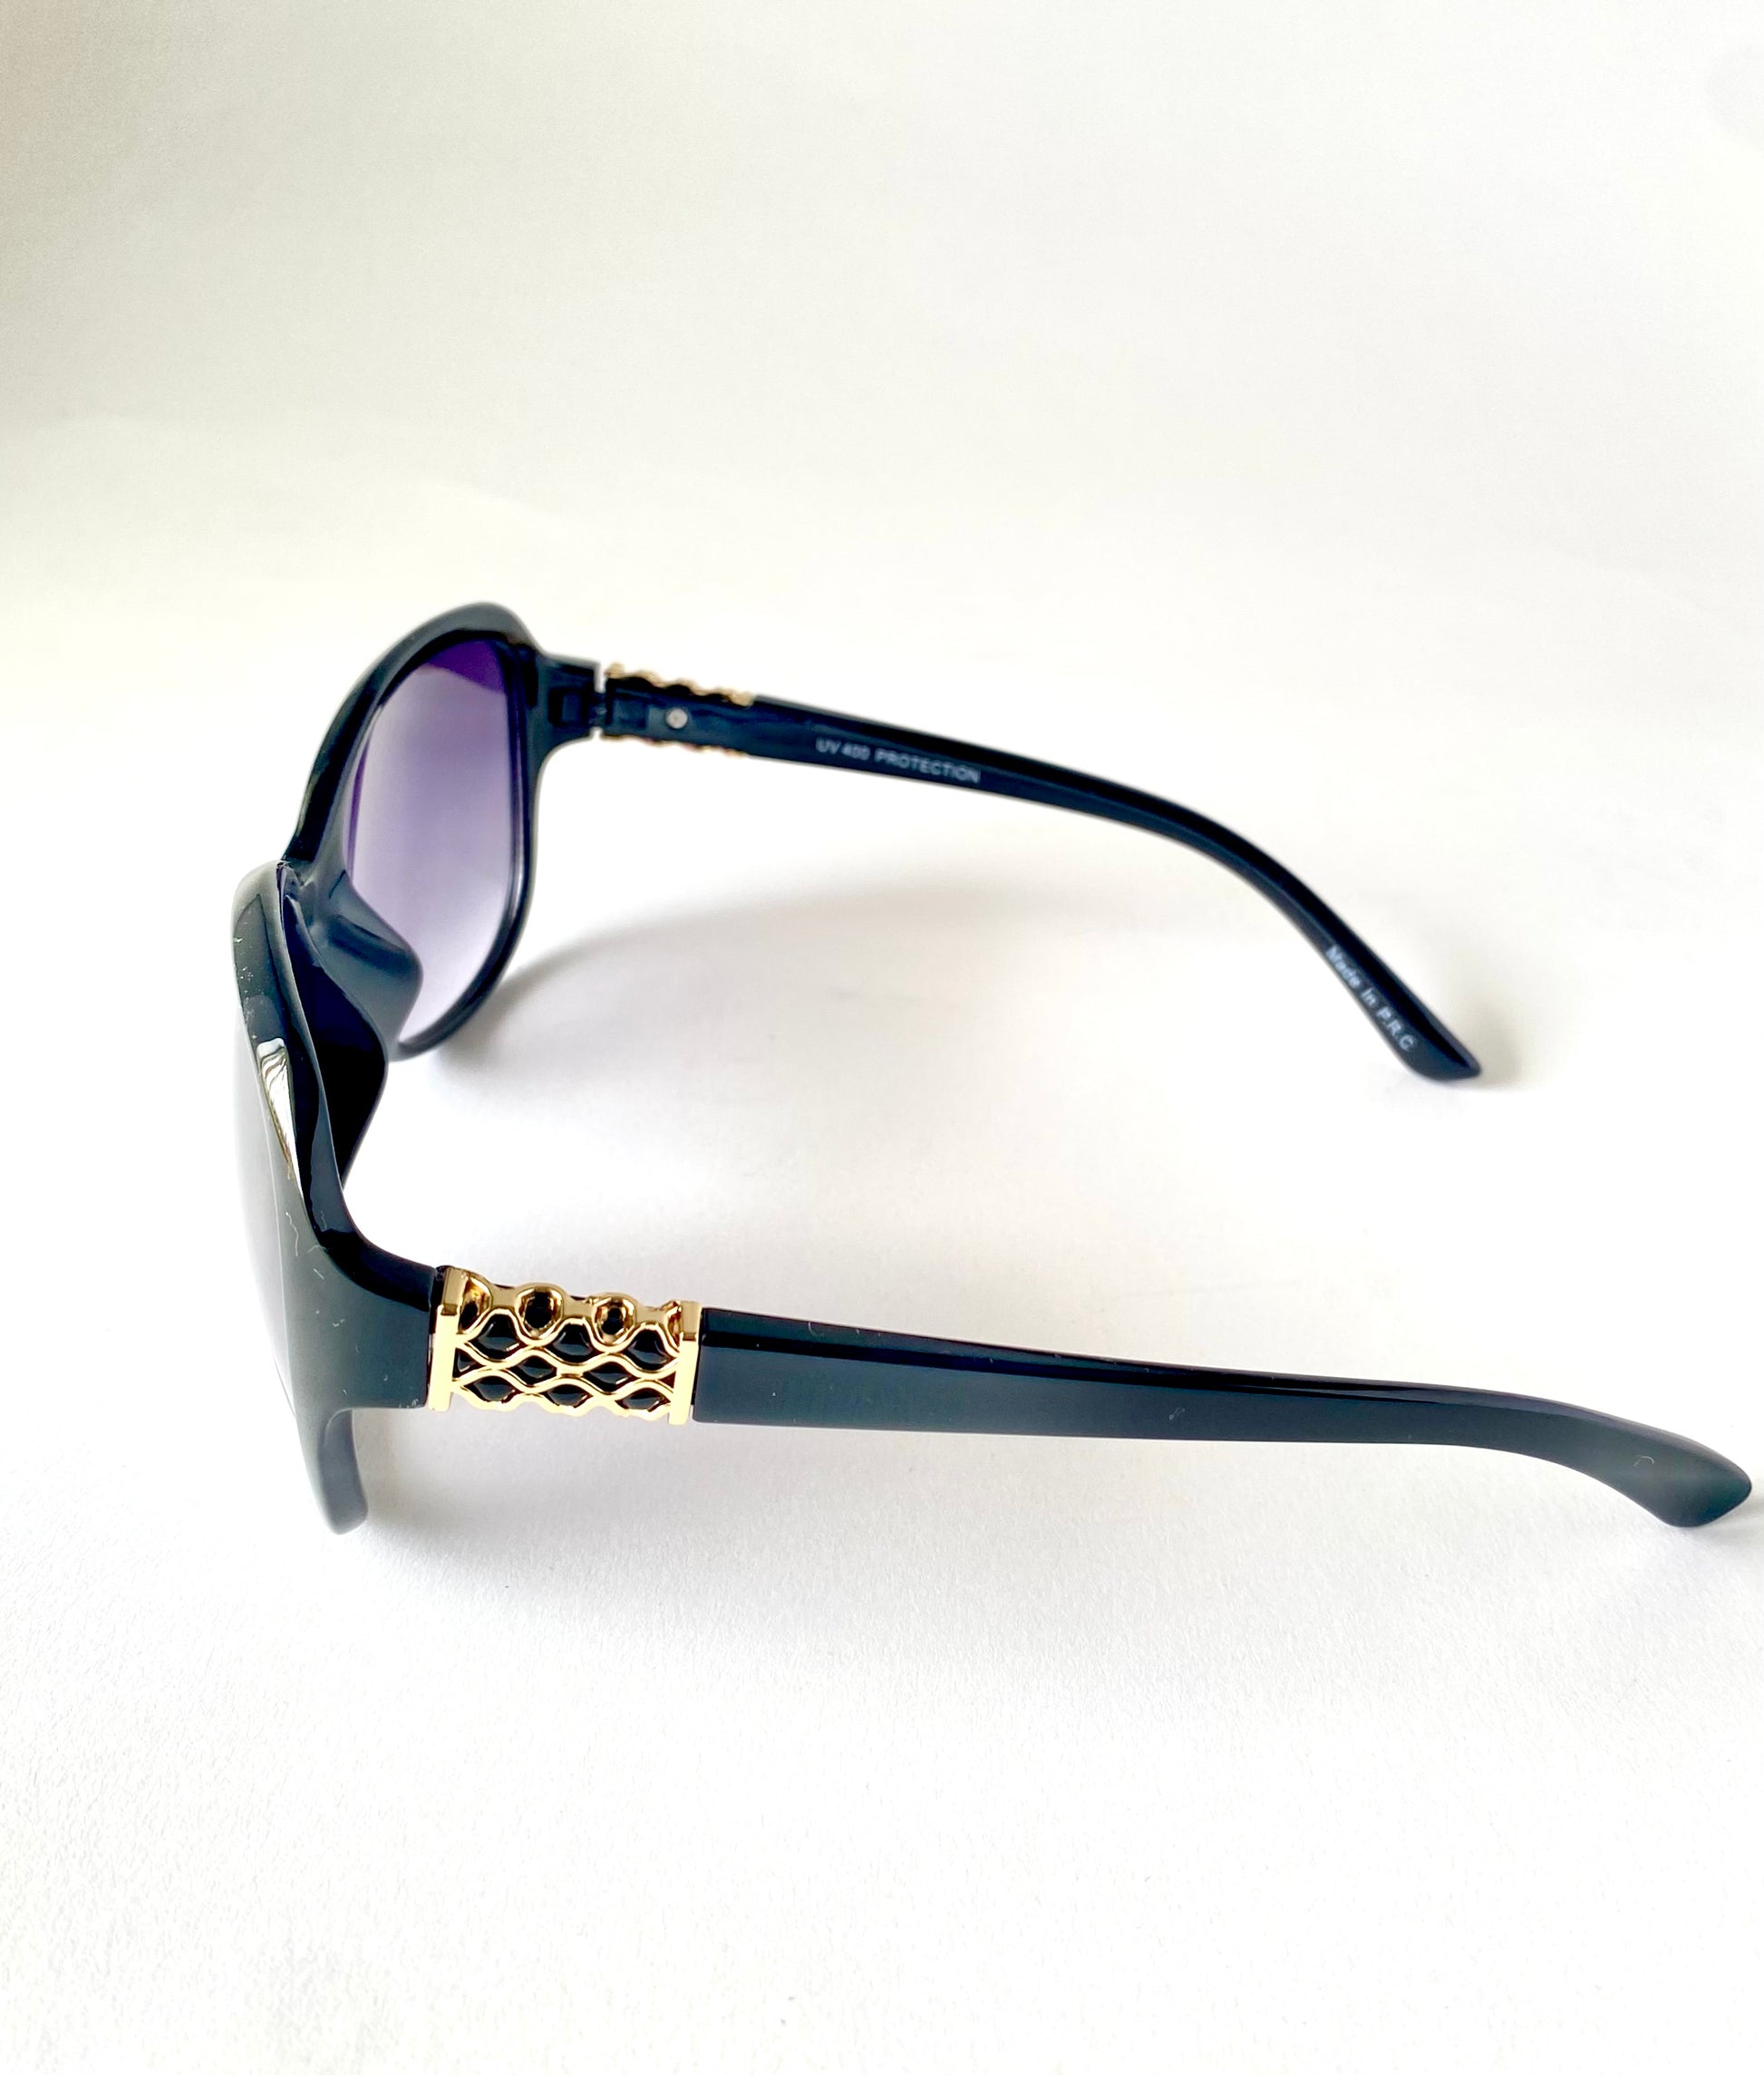 Decorated Round  Sunglasses - Fashion Sophisticated Boutique